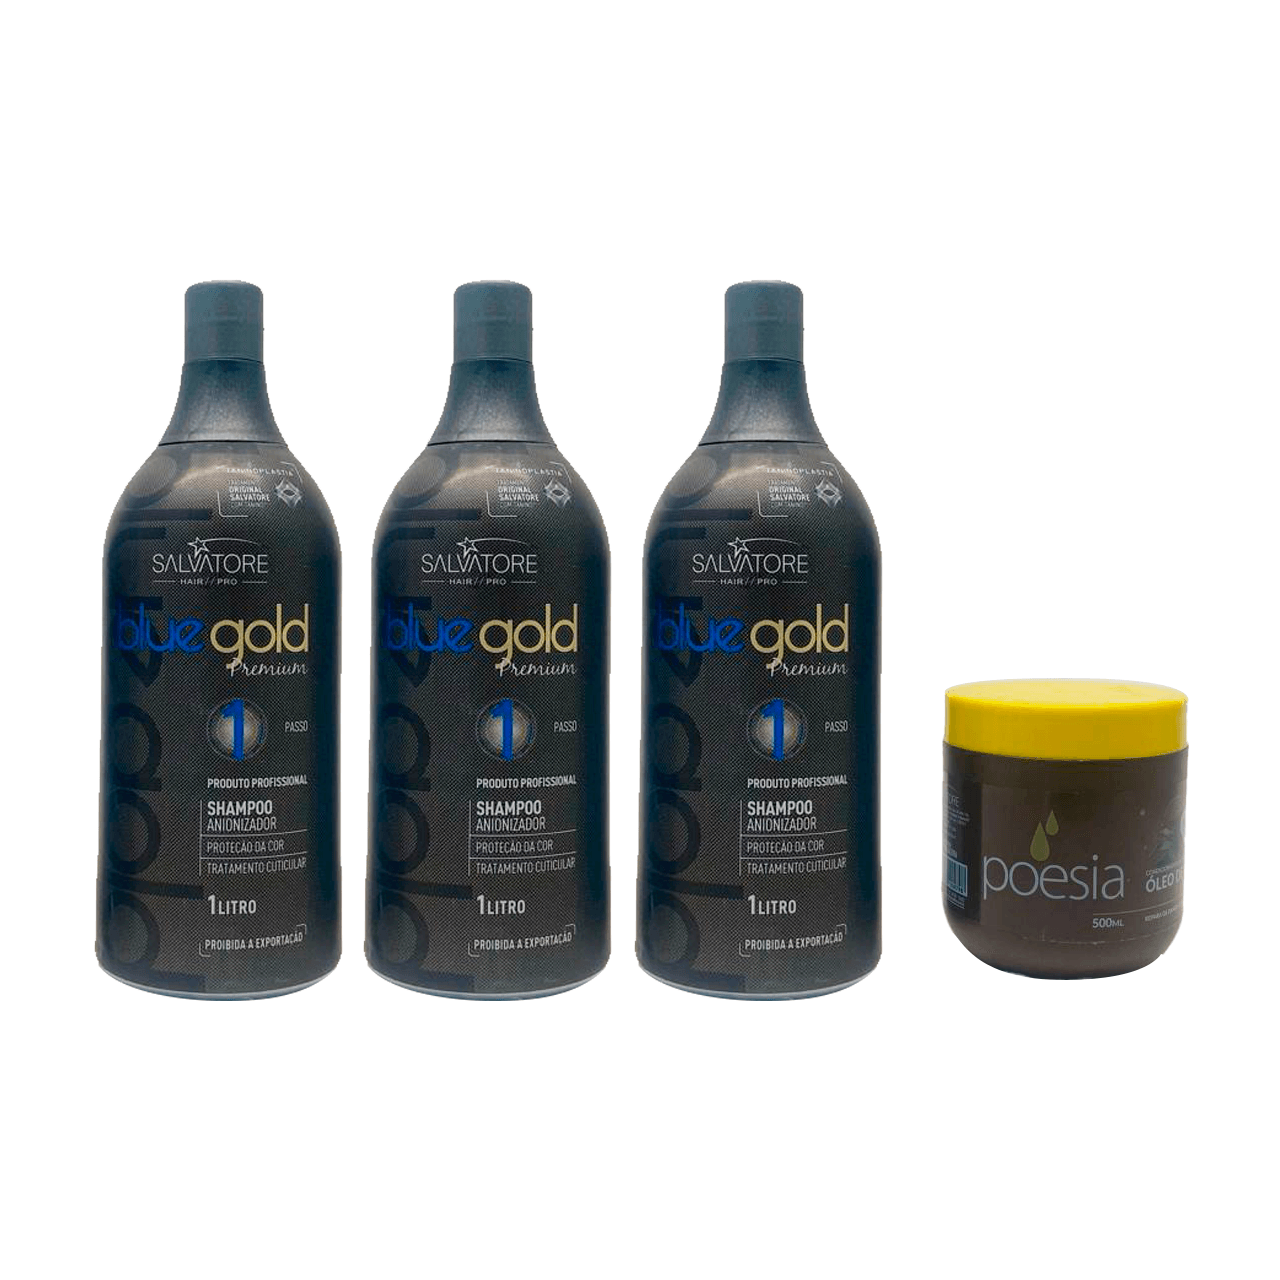 Salvatore, Blue Gold, Deep Cleansing Shampoo For Hair, 3x1L + Poesia Oleo de Coco, Hair Mask, 500g - BUY BRAZIL STORE